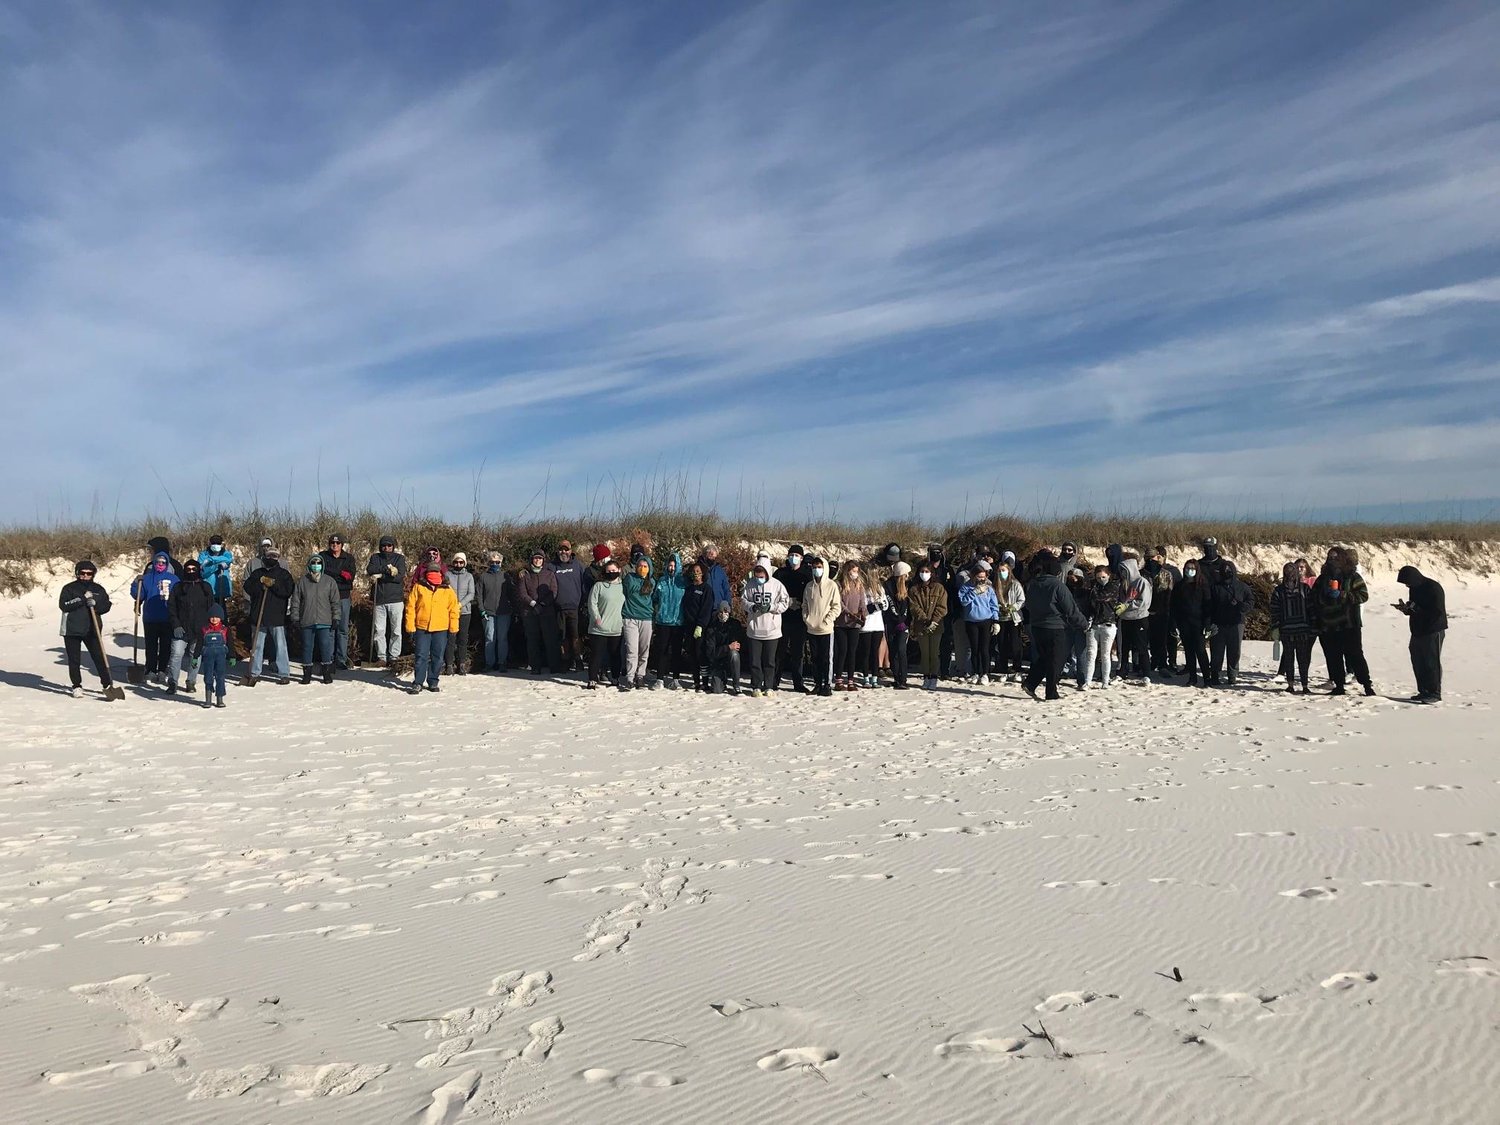 Gulf State Park staff, volunteers young and old and students from Gulf Shores High School worked to place 427 recycled Christmas trees in the dunes.